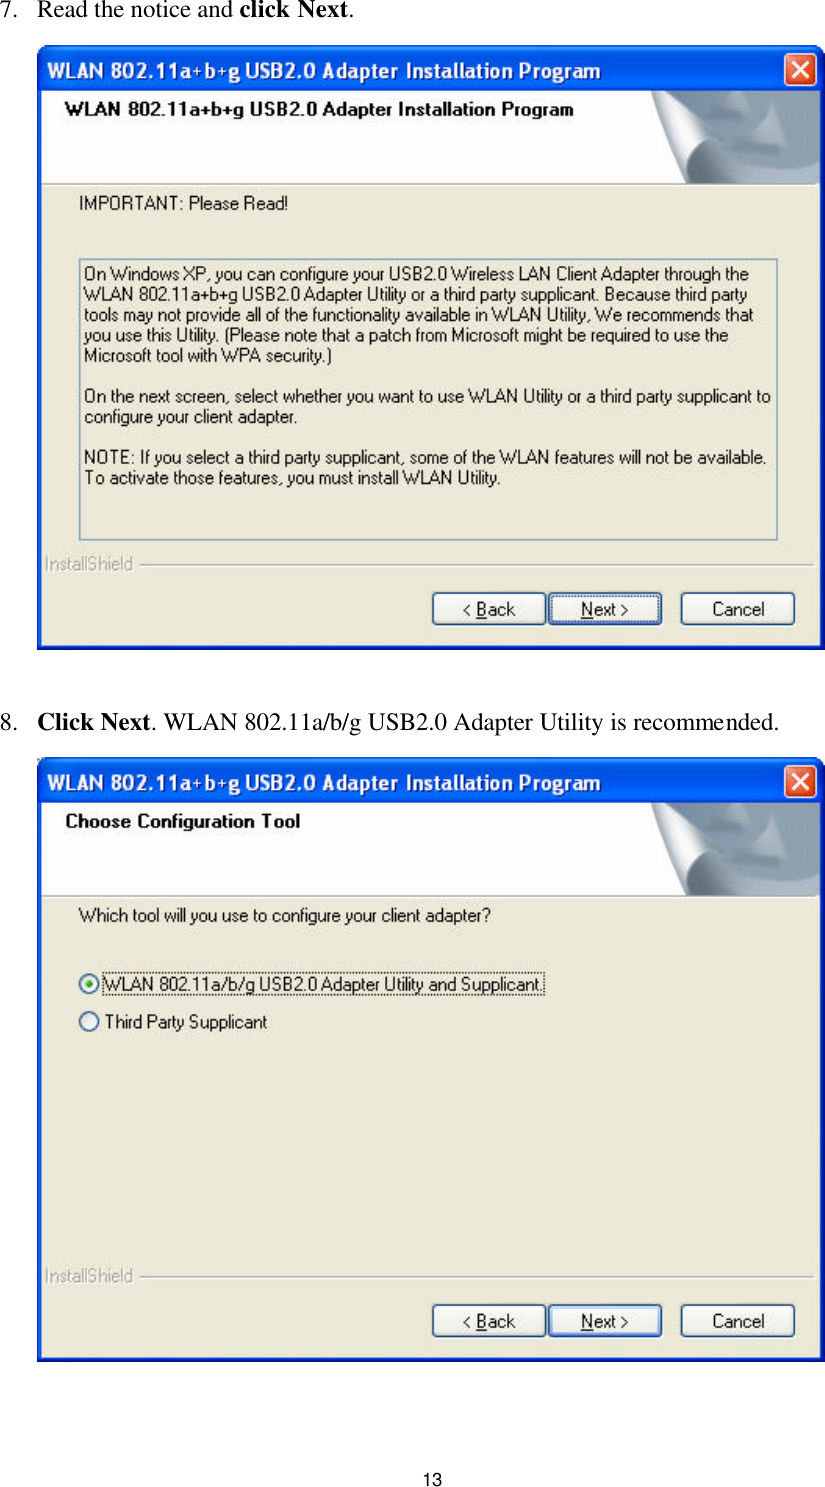 13 7. Read the notice and click Next.   8. Click Next. WLAN 802.11a/b/g USB2.0 Adapter Utility is recommended.   